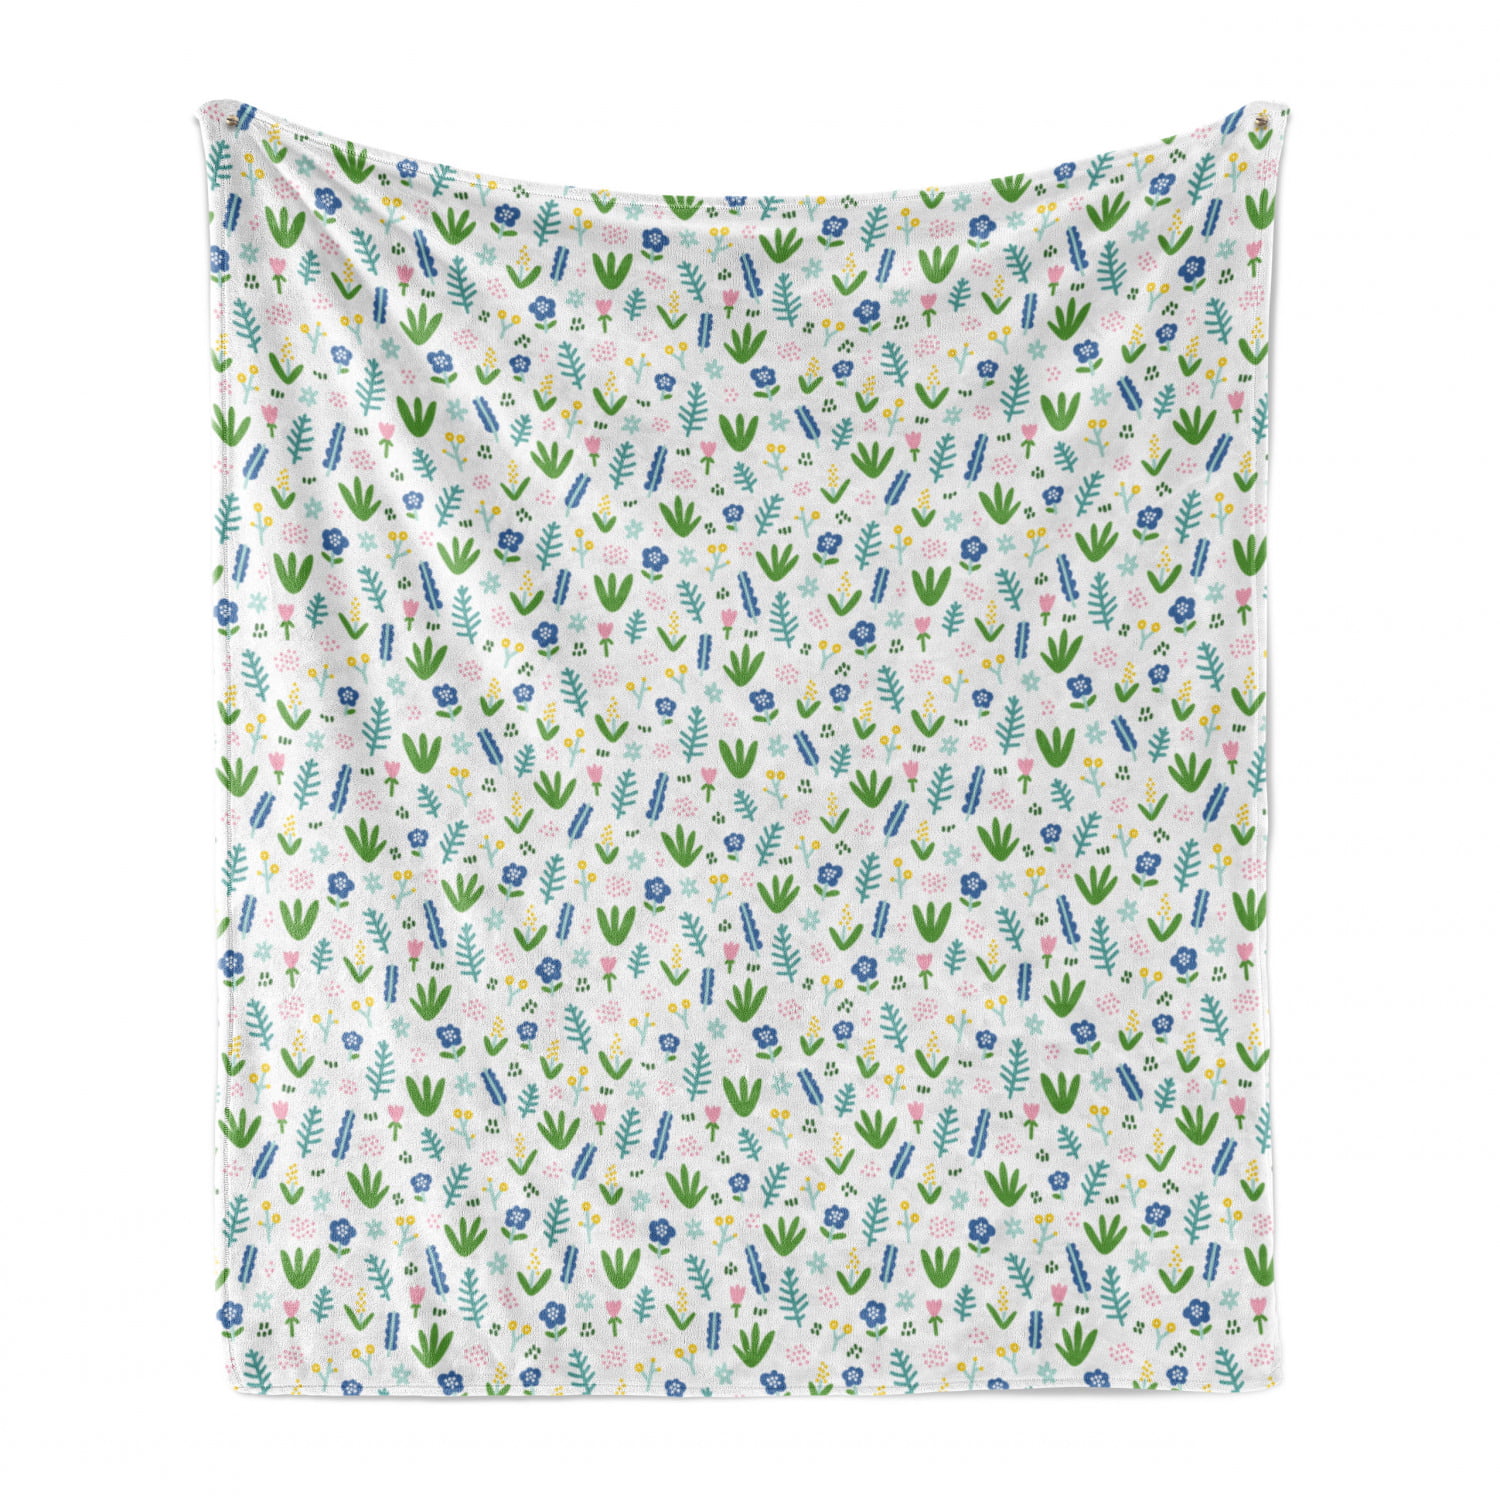 60 x 80 Ambesonne Botanic Soft Flannel Fleece Throw Blanket Cozy Plush for Indoor and Outdoor Use Pastel Blossom Branches Little Tulip Petals Along Leaves and Herbs Green Violet Blue and Pink